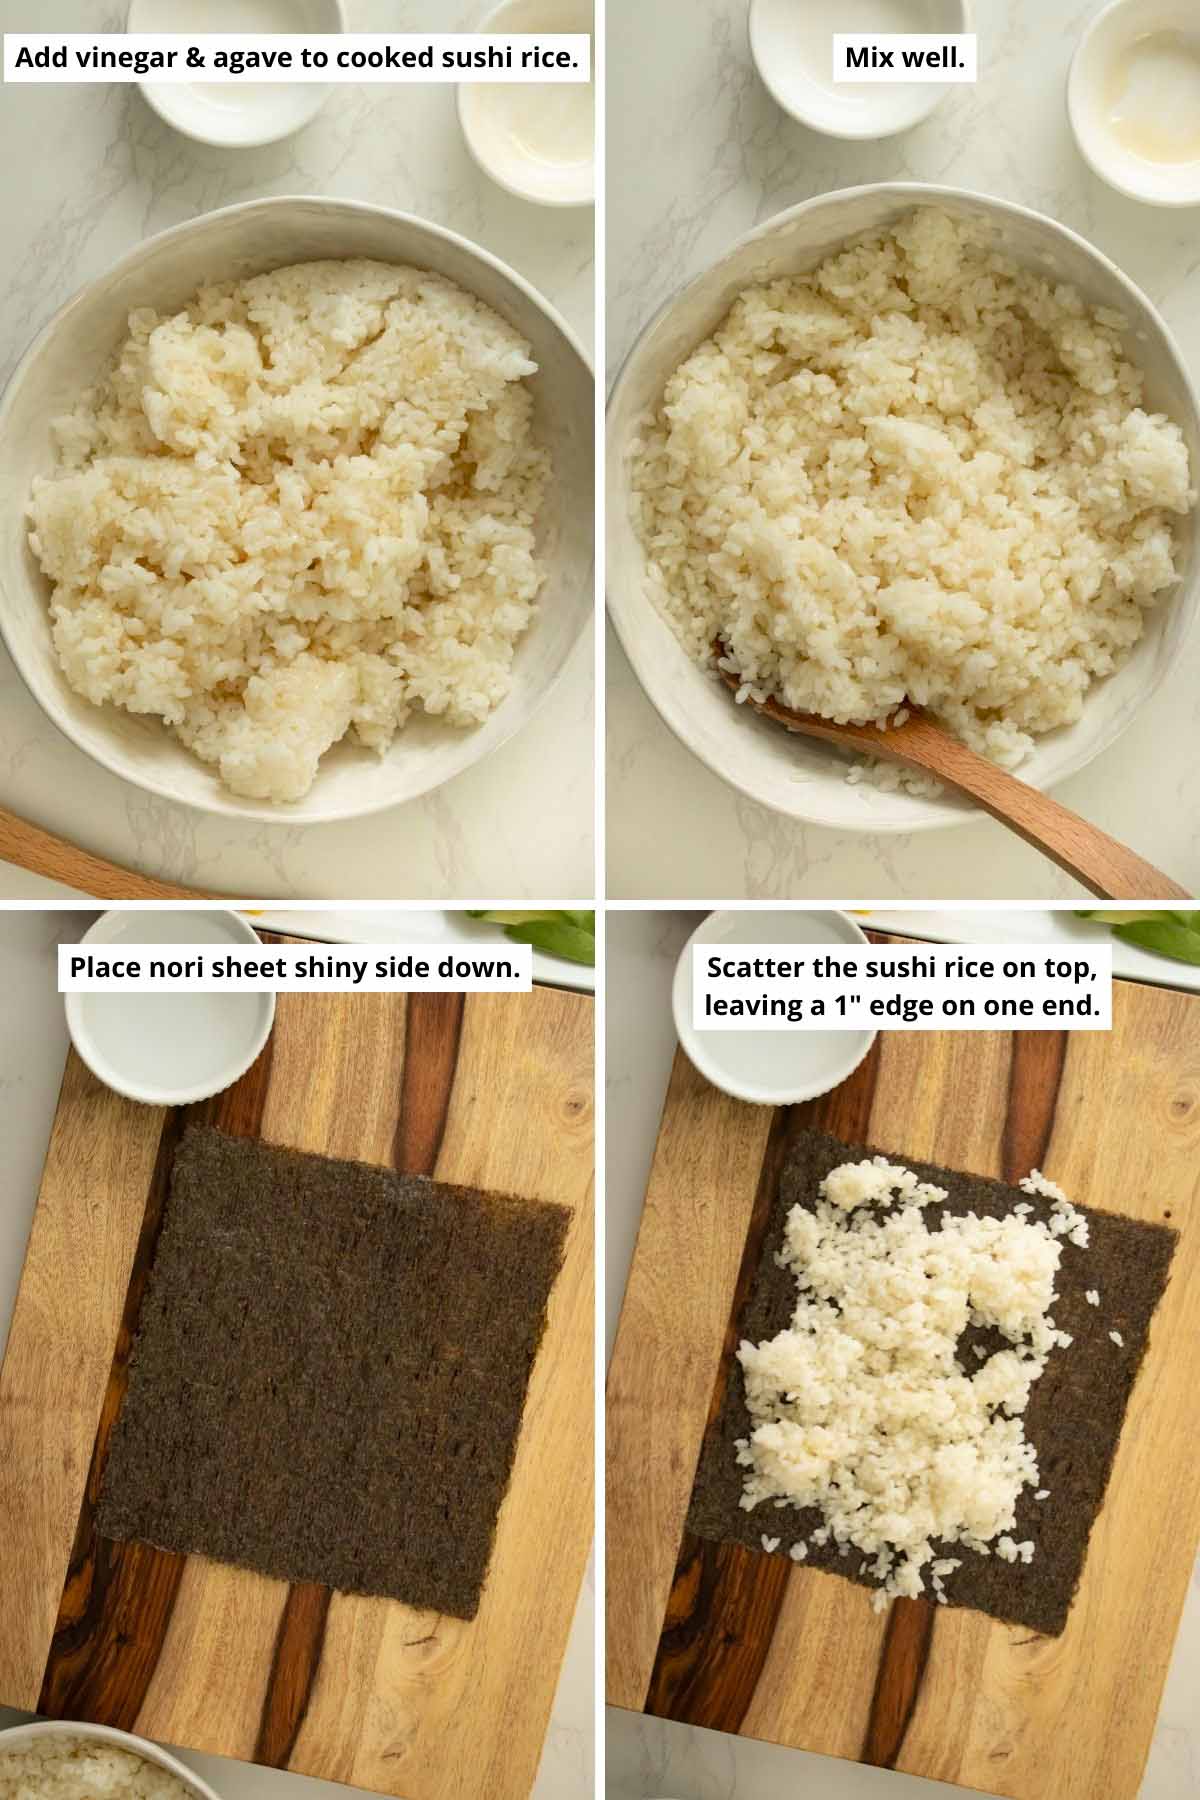 image collage showing adding the agave and vinegar to the sushi rice and scattering the rice on the piece of nori on the cutting board